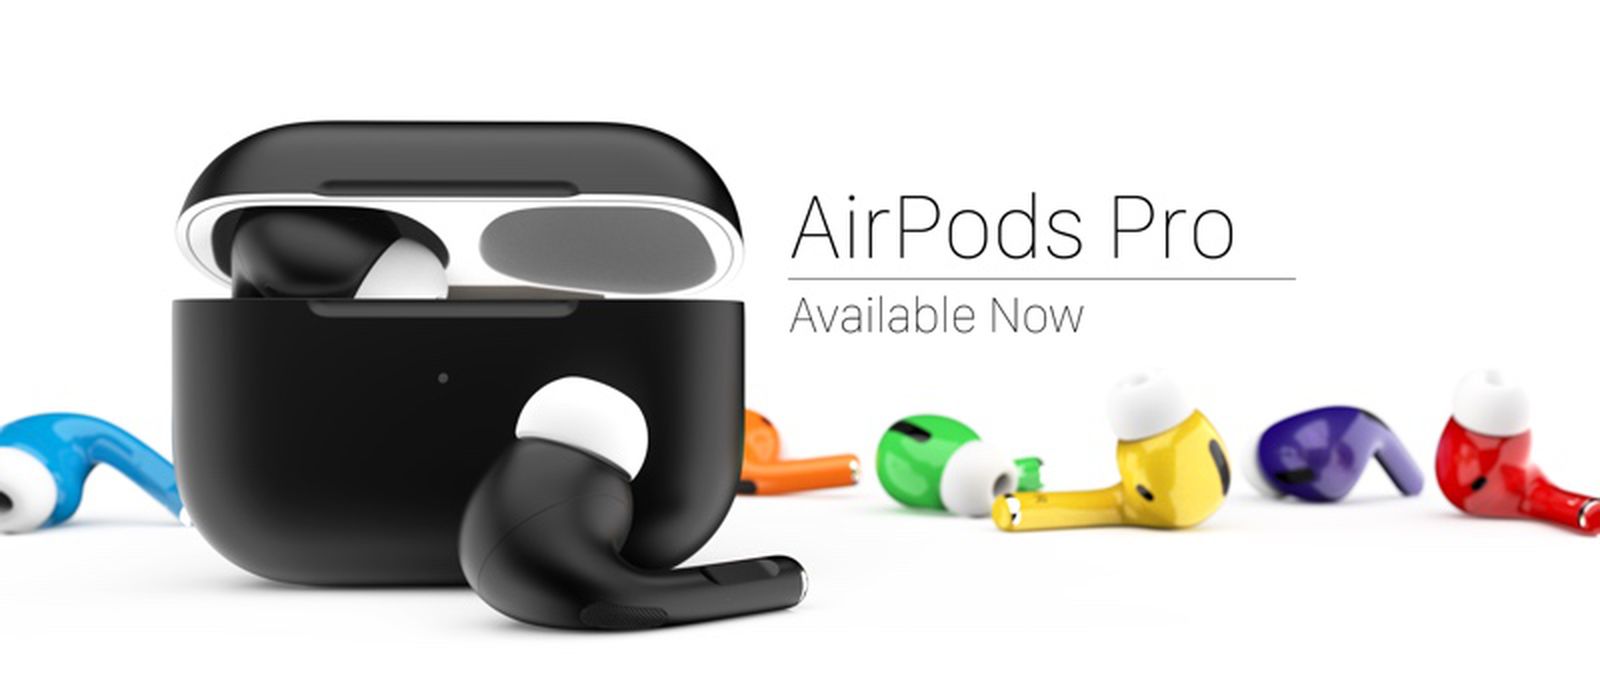 ColorWare Offering Custom-Painted AirPods Pro, Pricing Starts at -